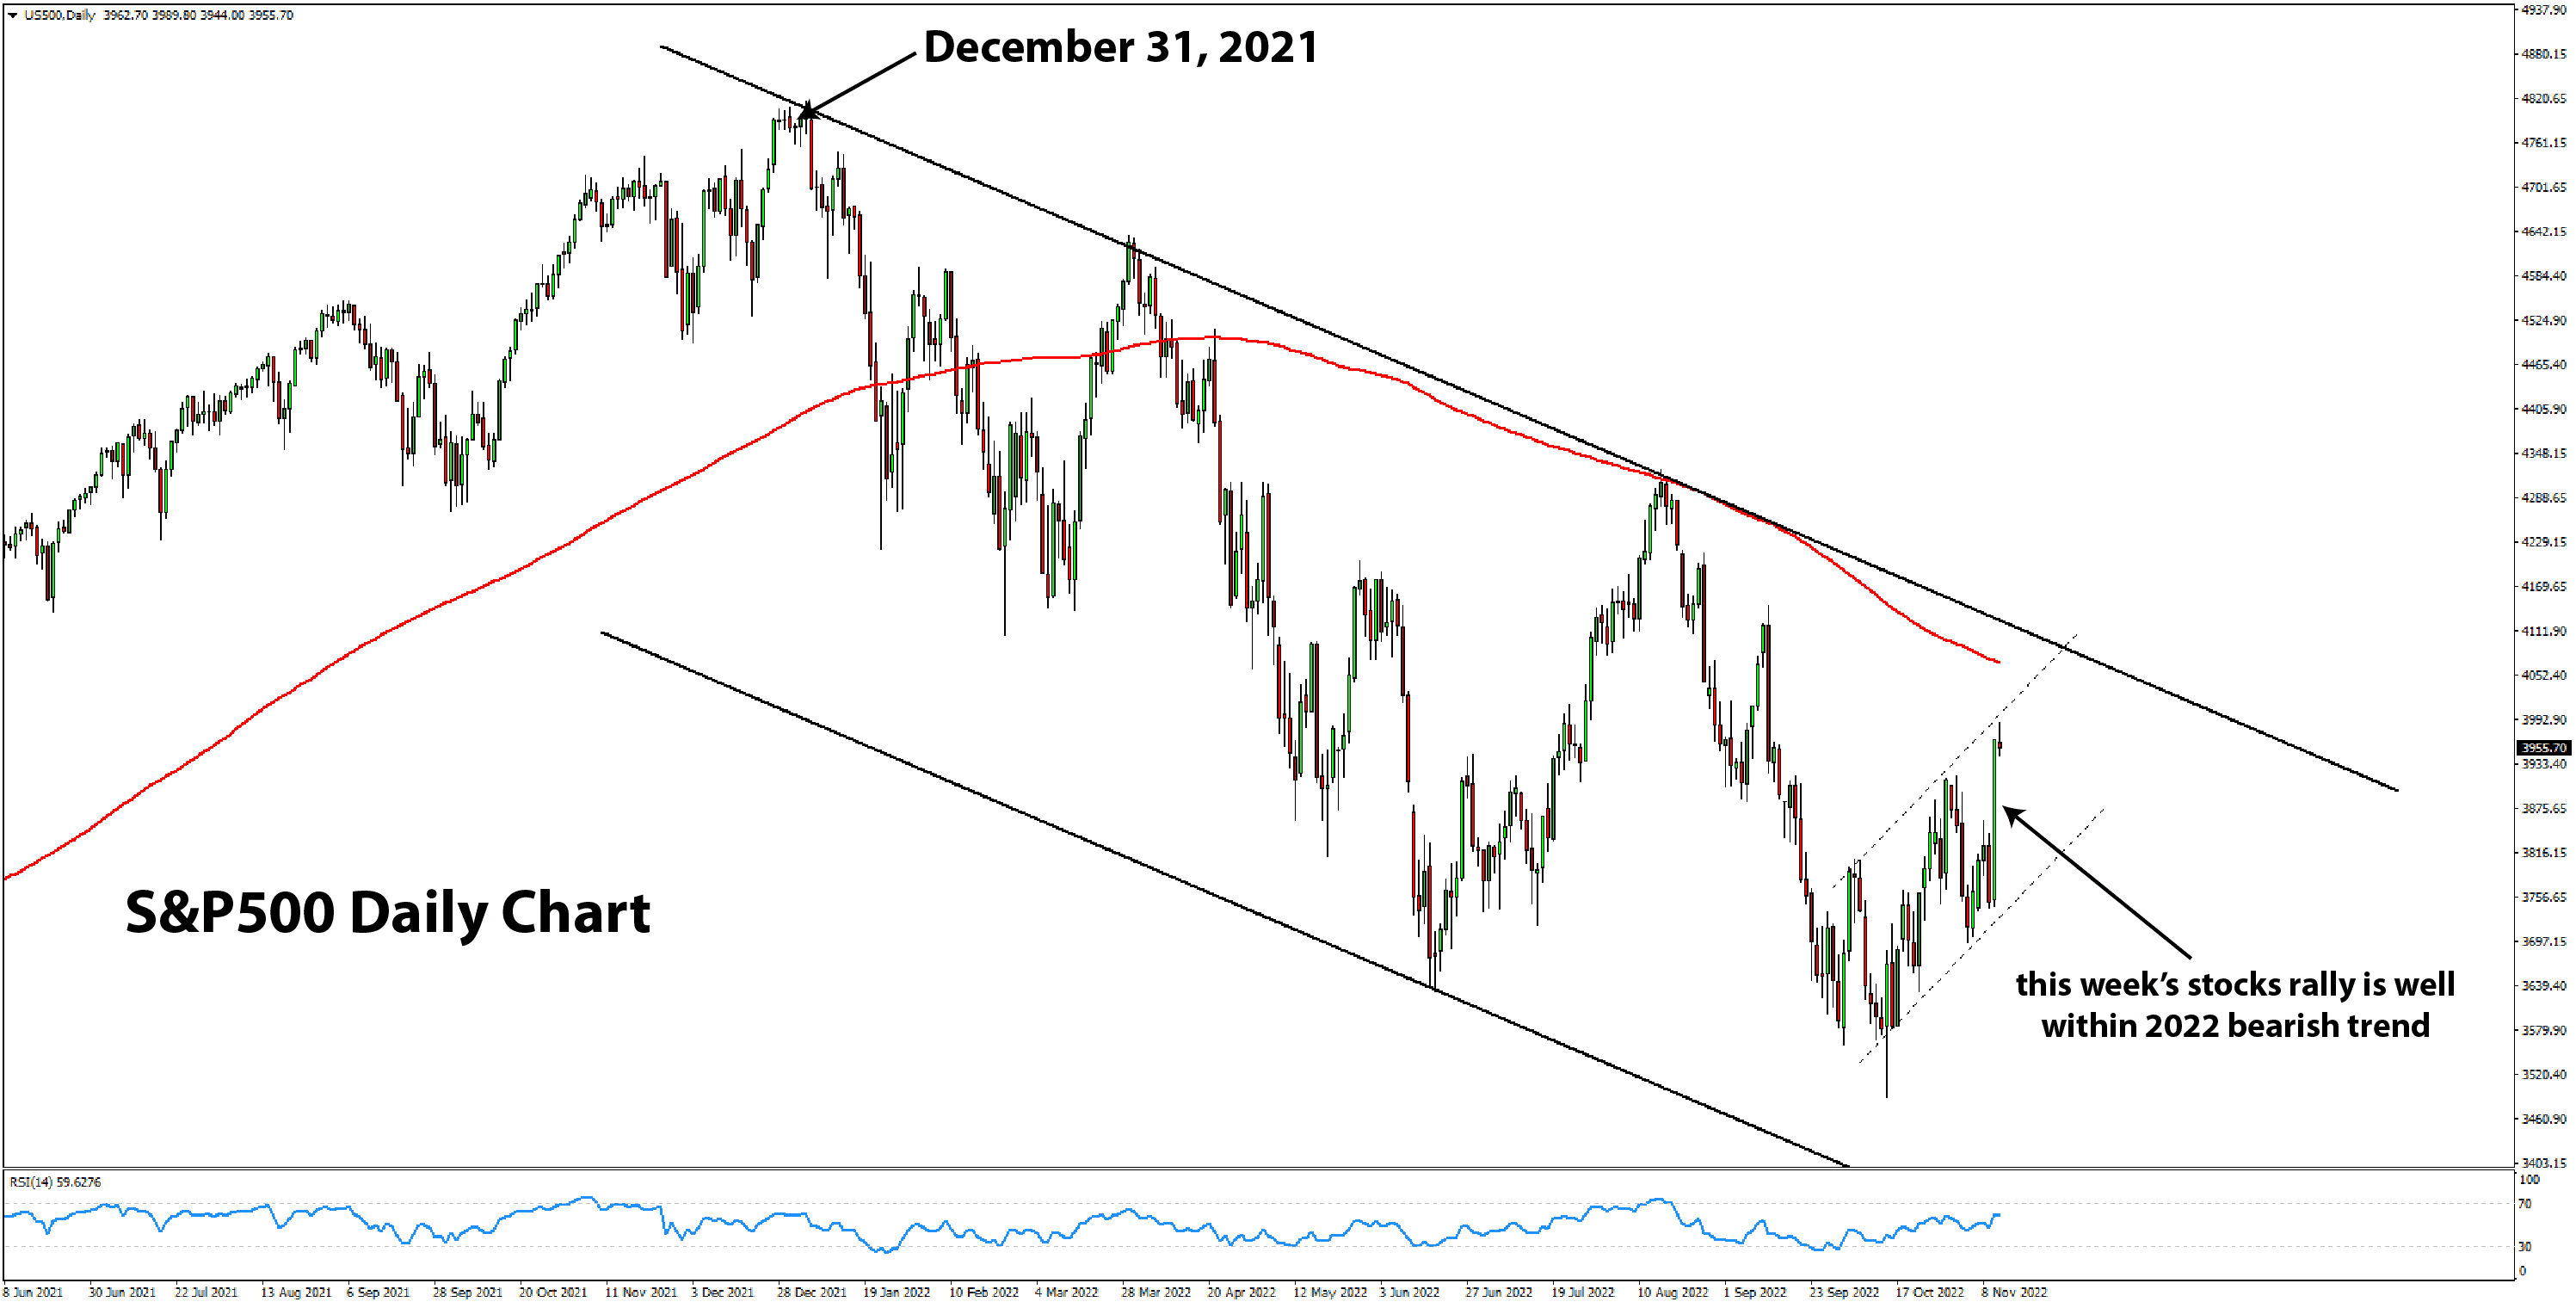 S&P 500 is still well within the bearish trend